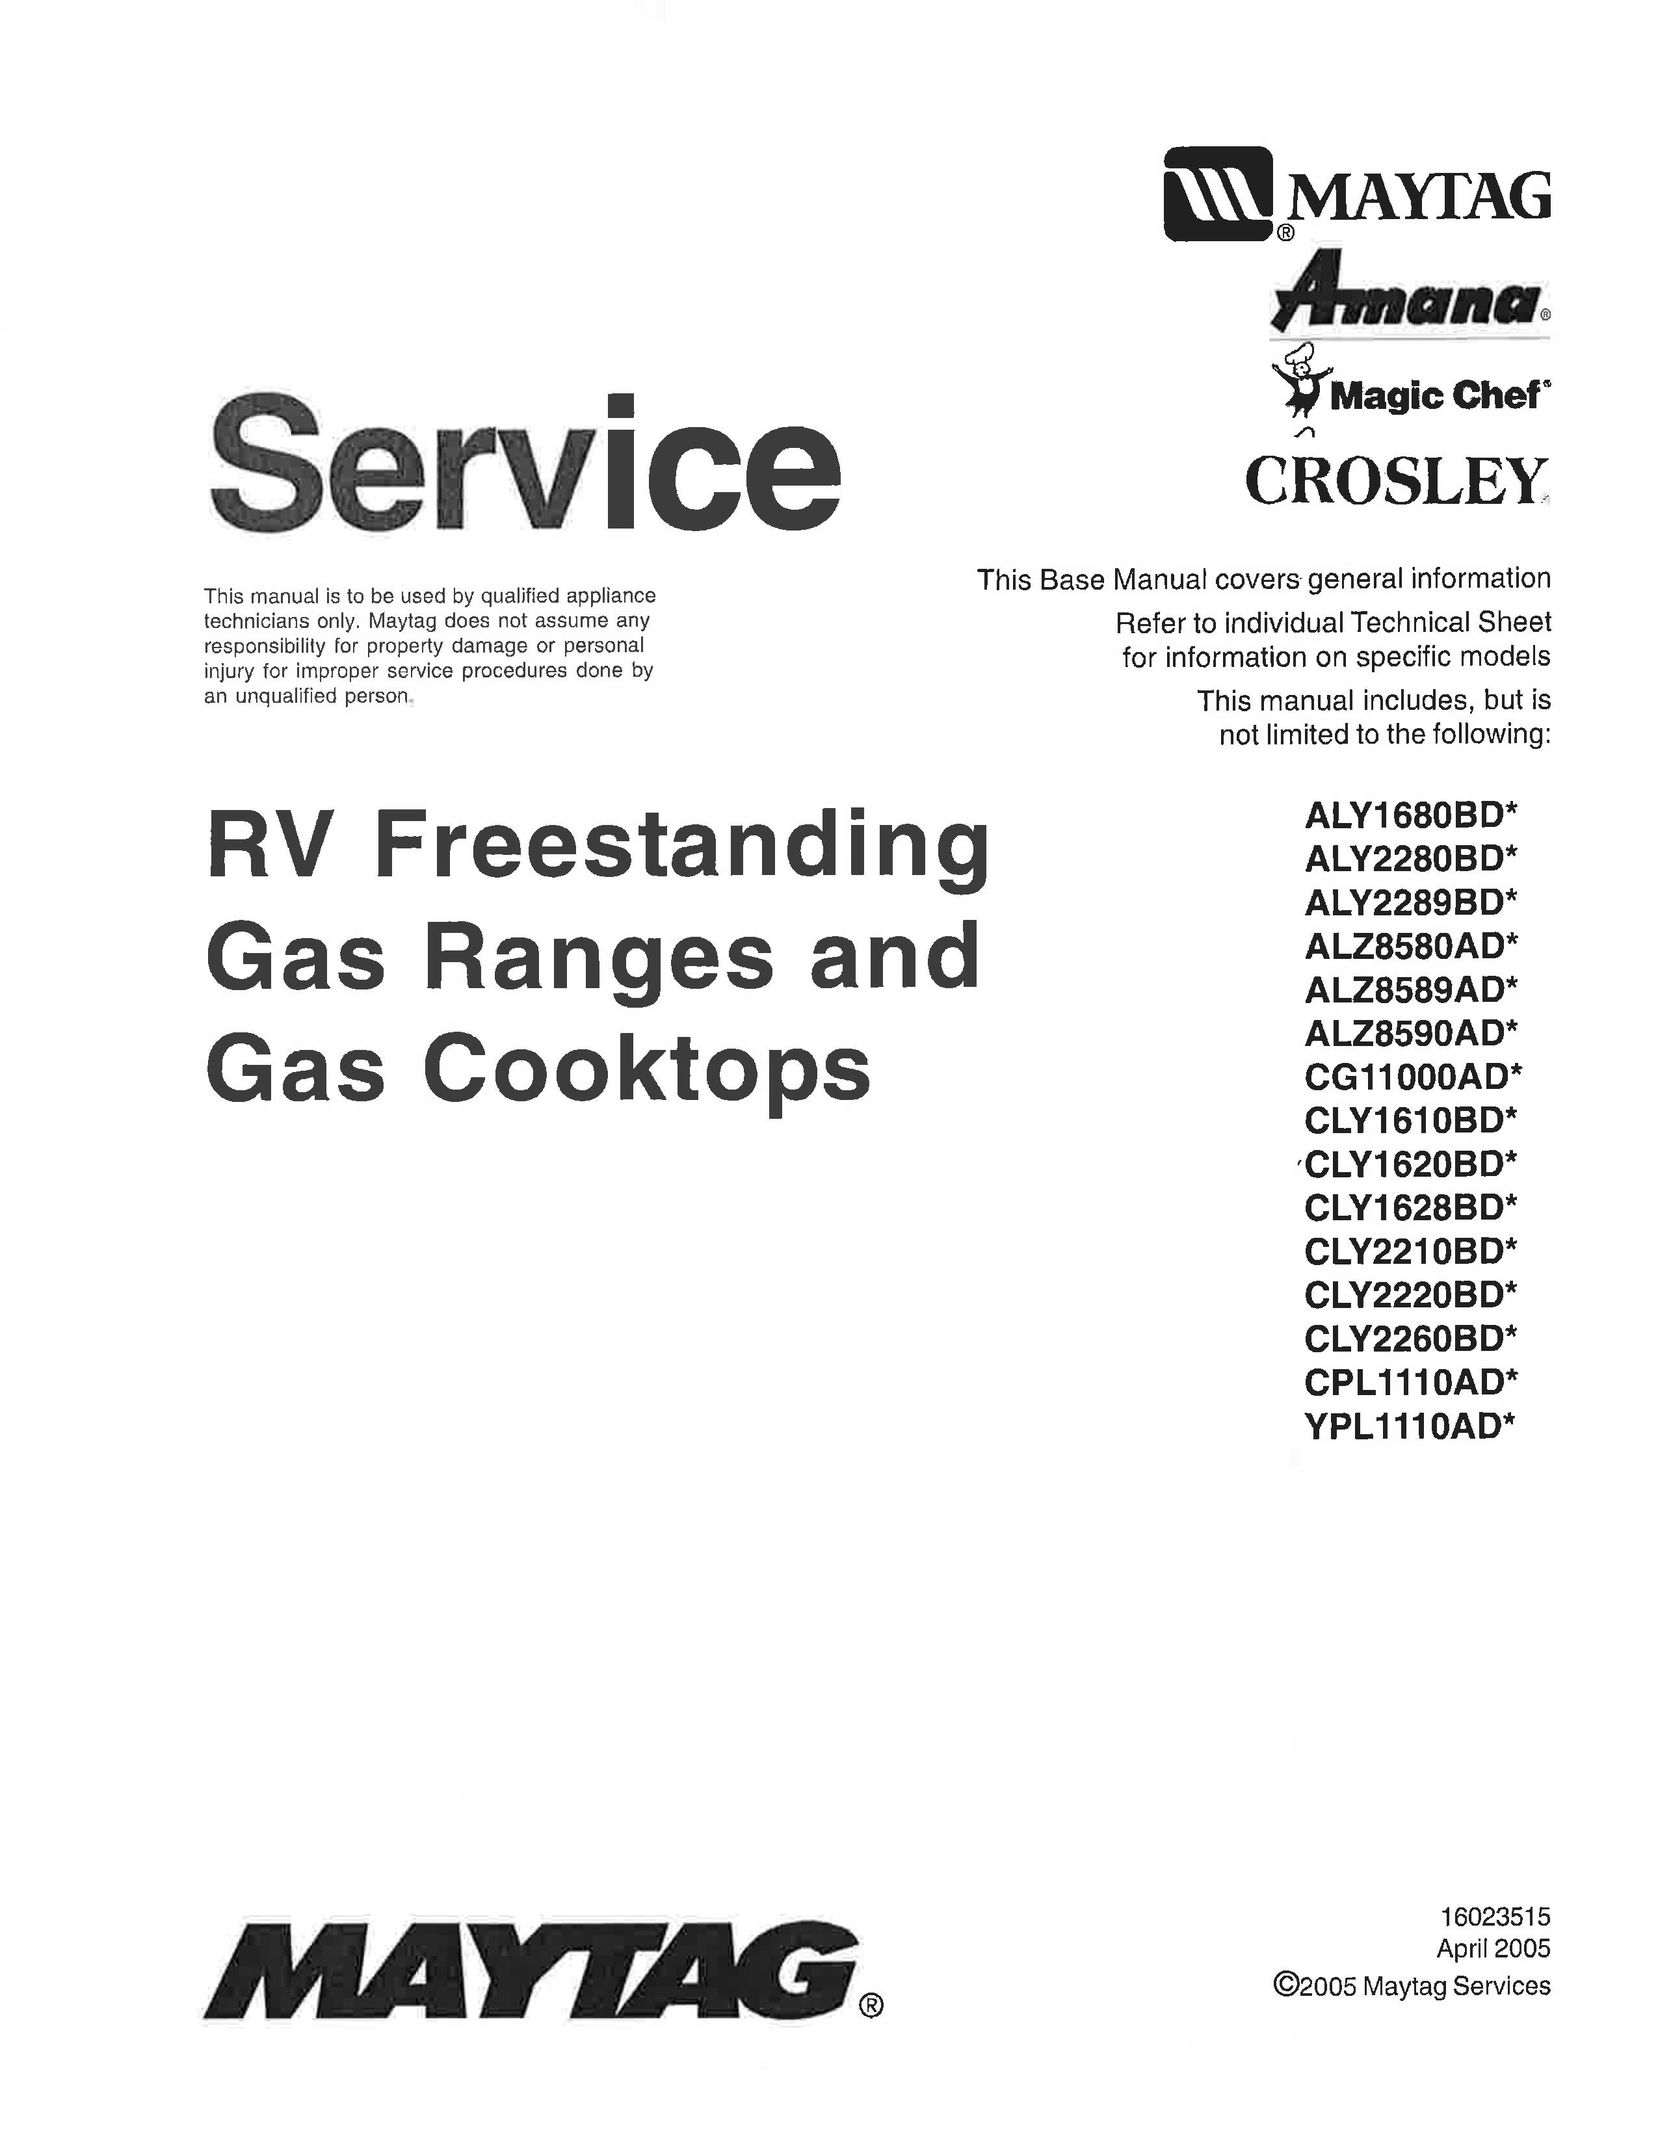 Maytag ALZ8590AD Cooktop User Manual